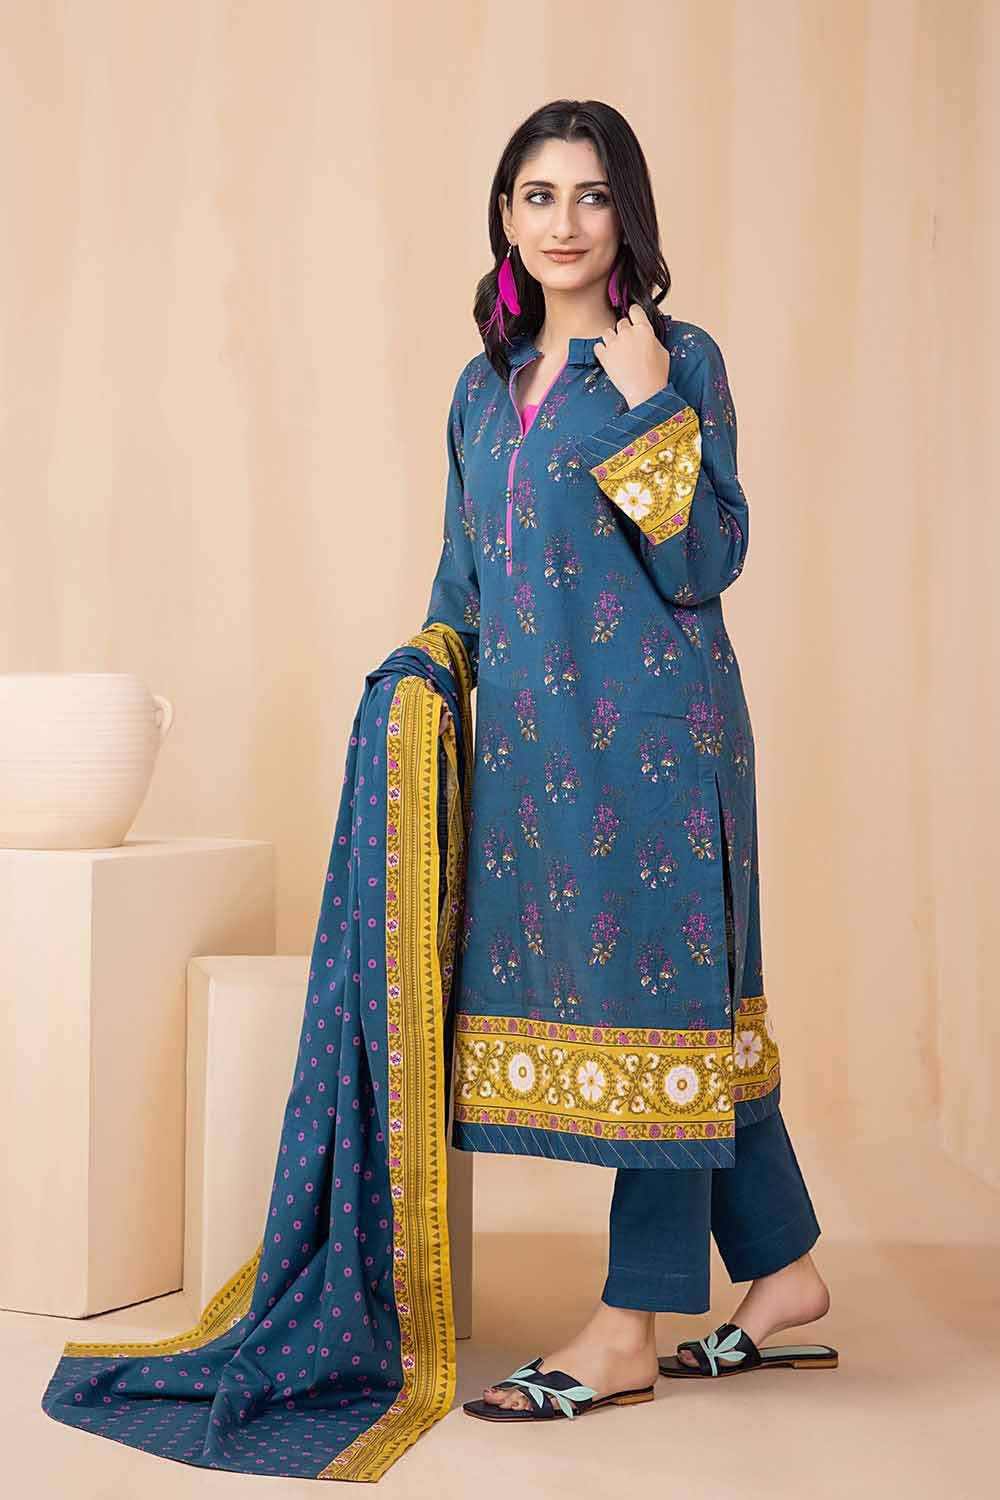 Gul Ahmed 3PC Khaddar Stitched Printed Suit K-22095 A